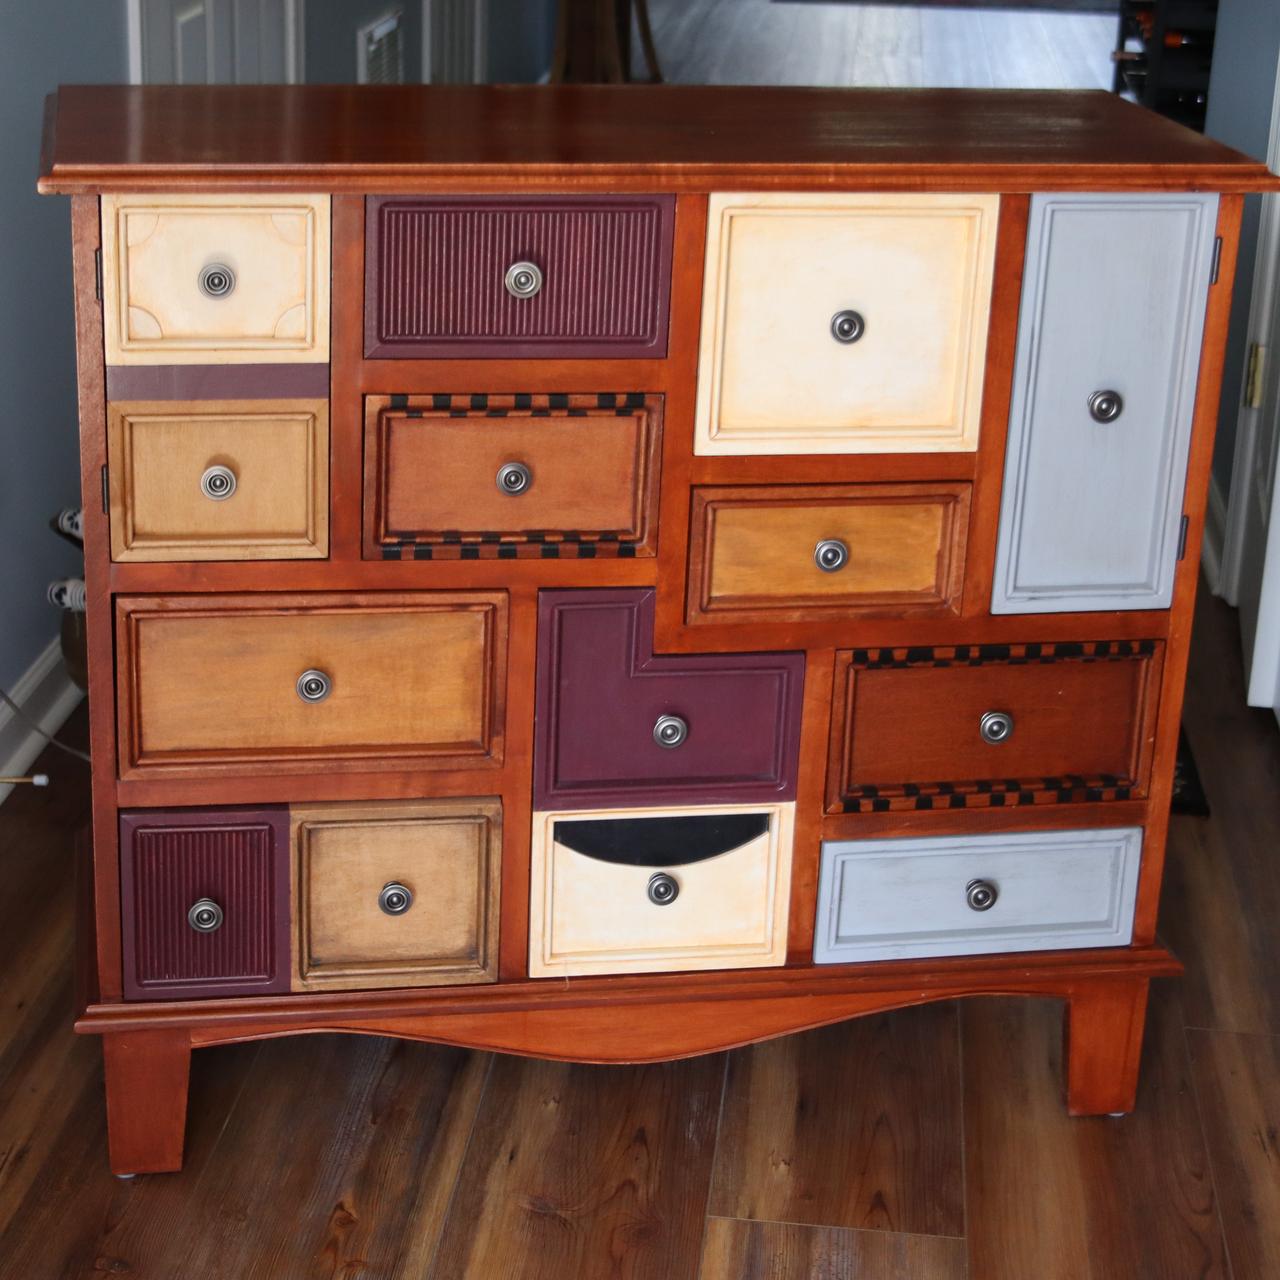 Don Wait made this chest with three types of wood